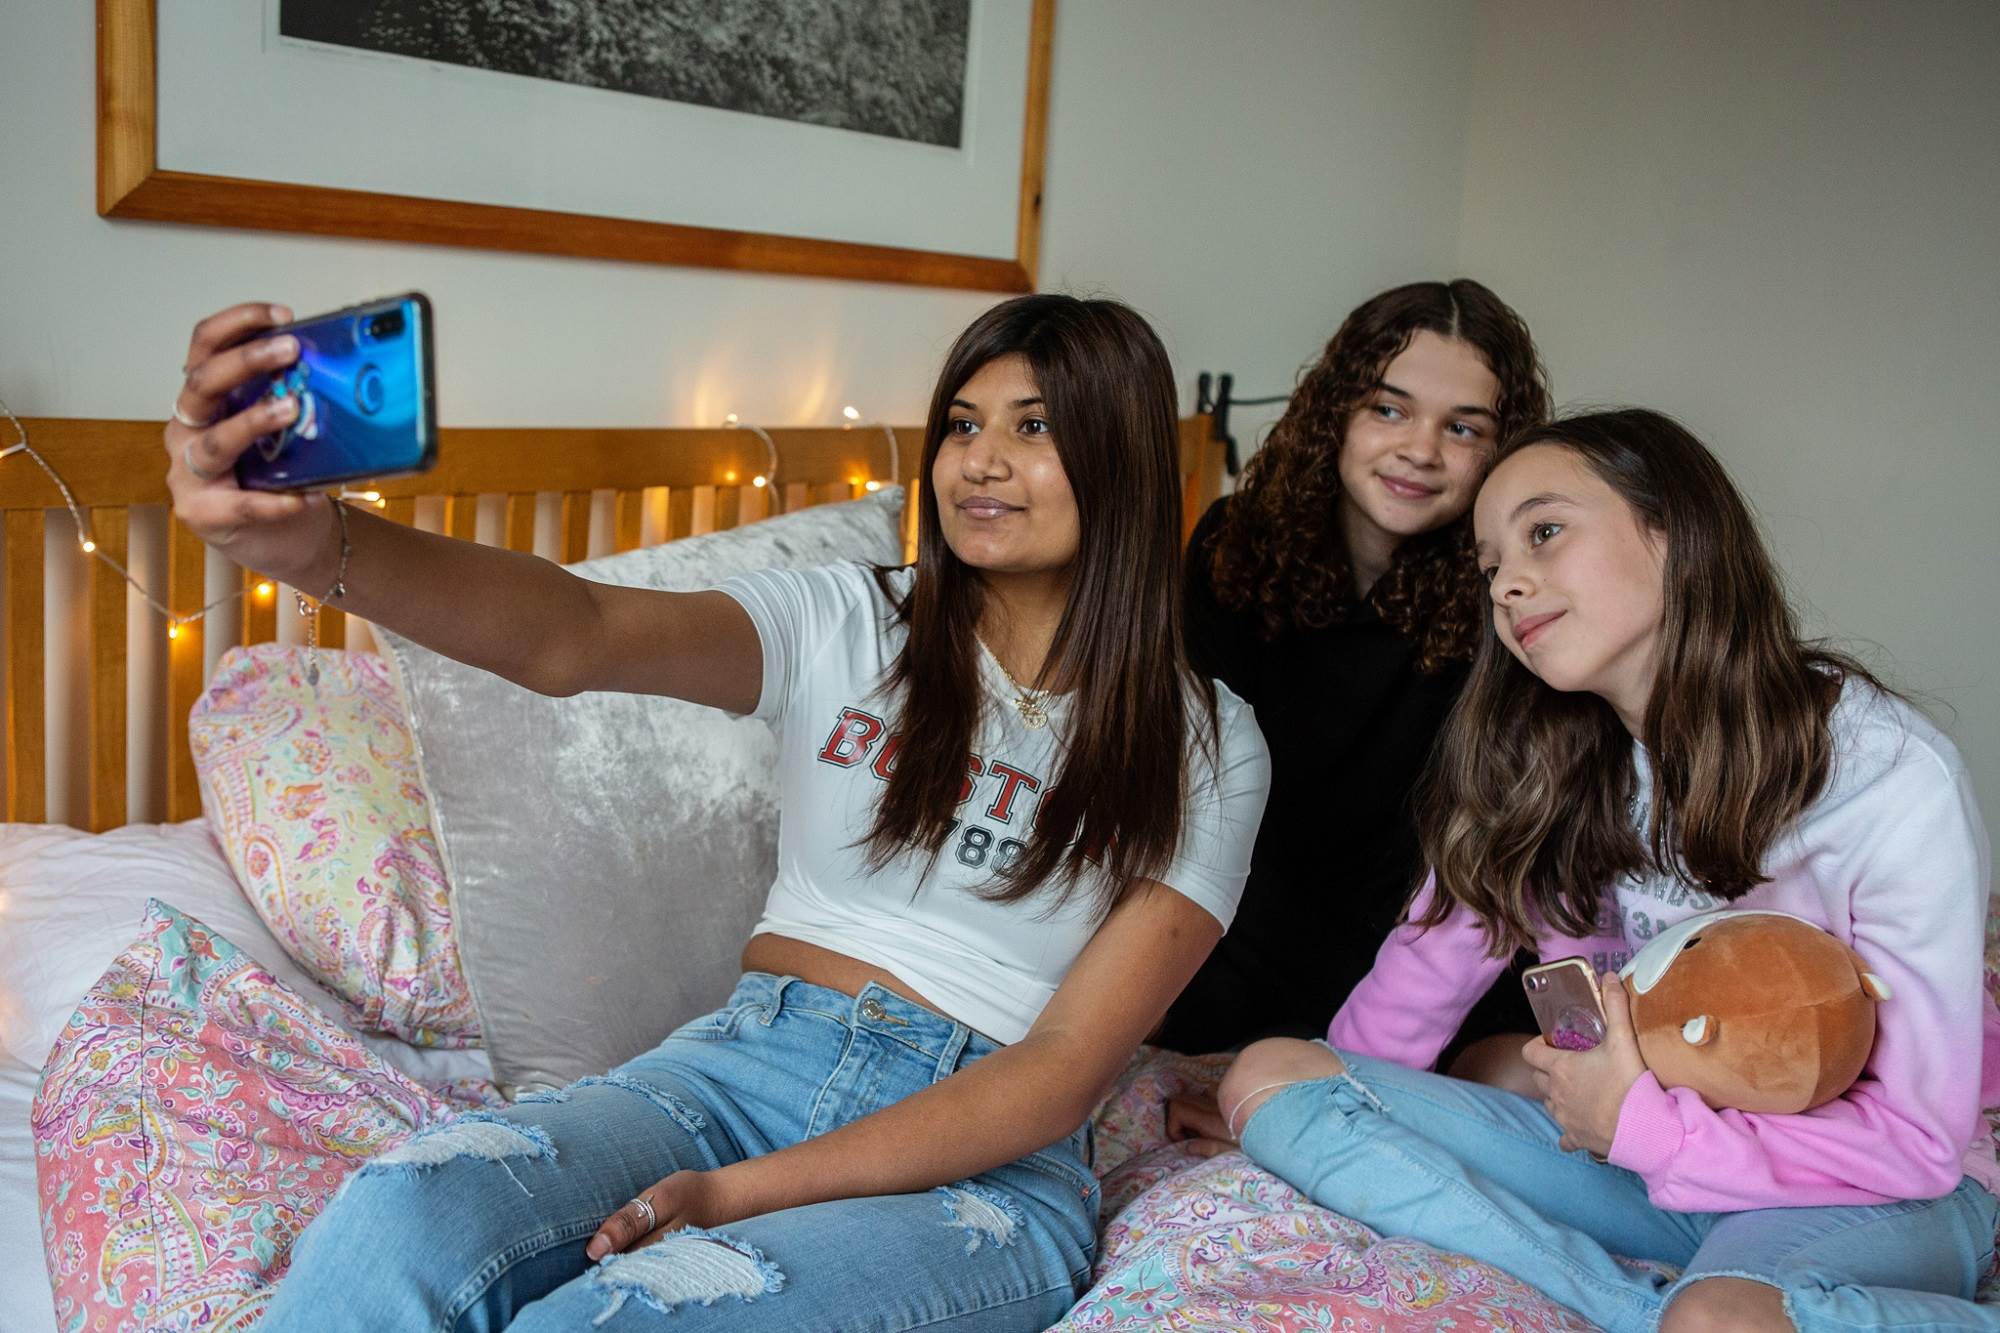 Teen Girl Takes Group Selfie With Two Other Girls